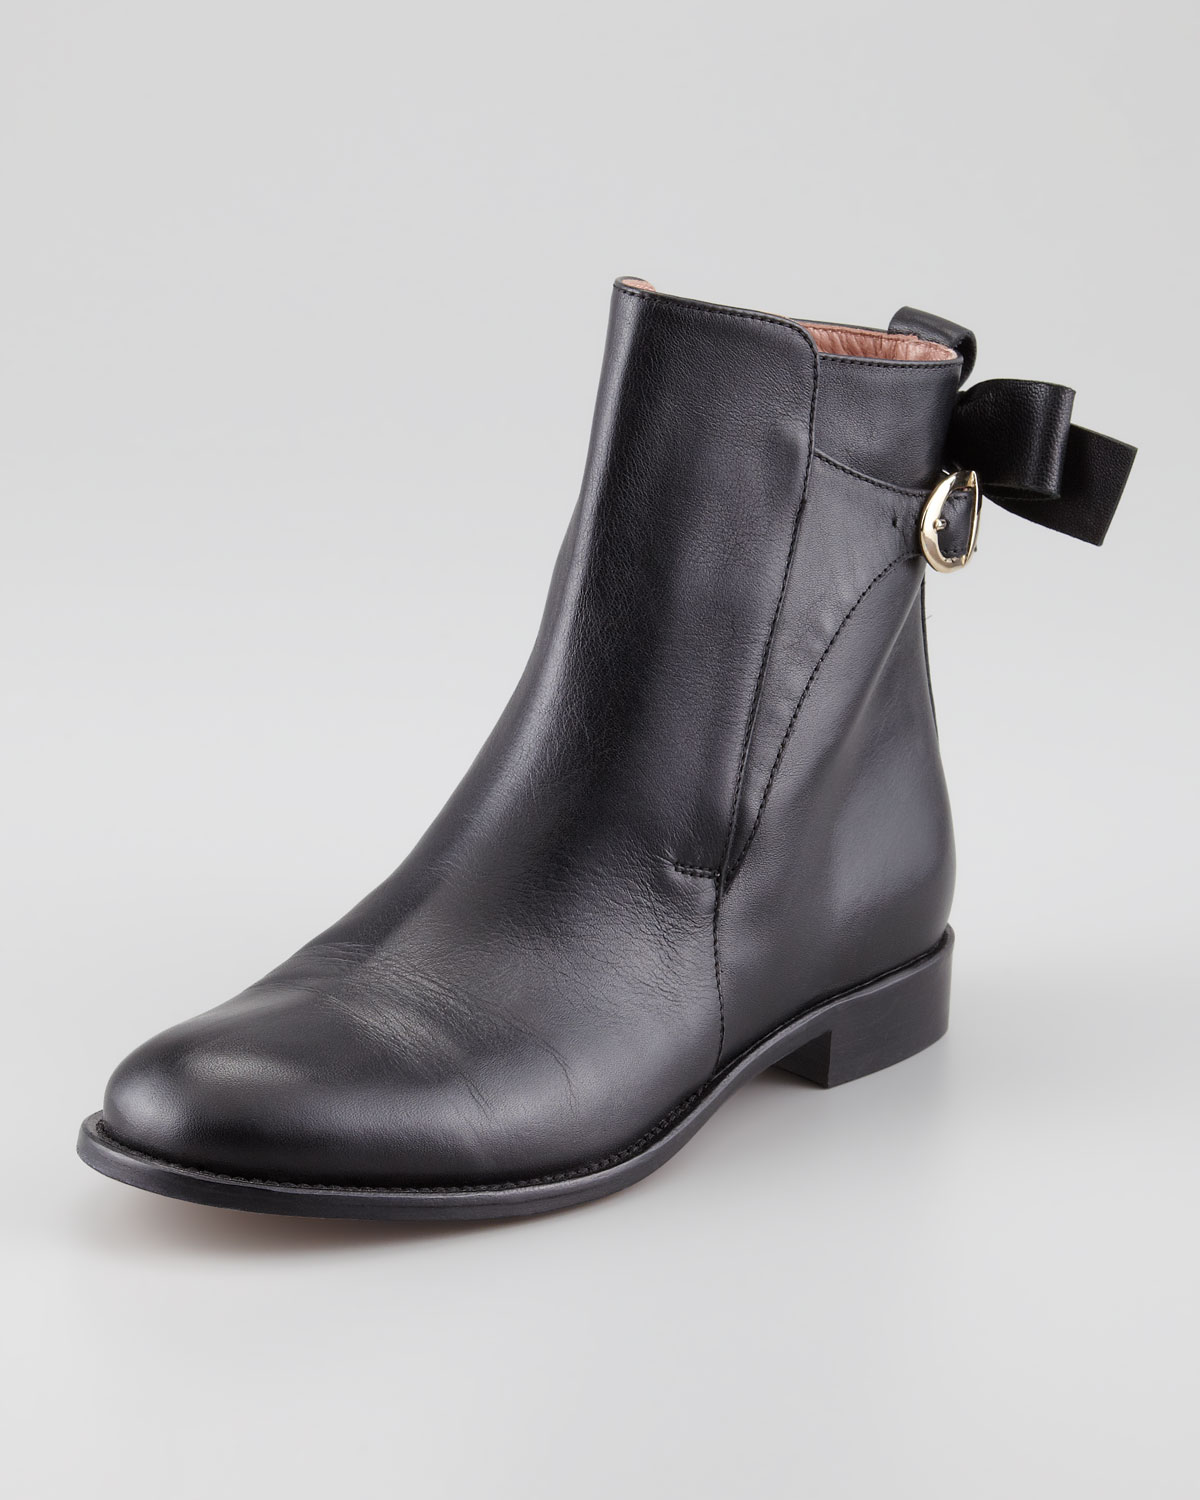 Red Valentino Ankle Boots Clearance, 53% OFF 